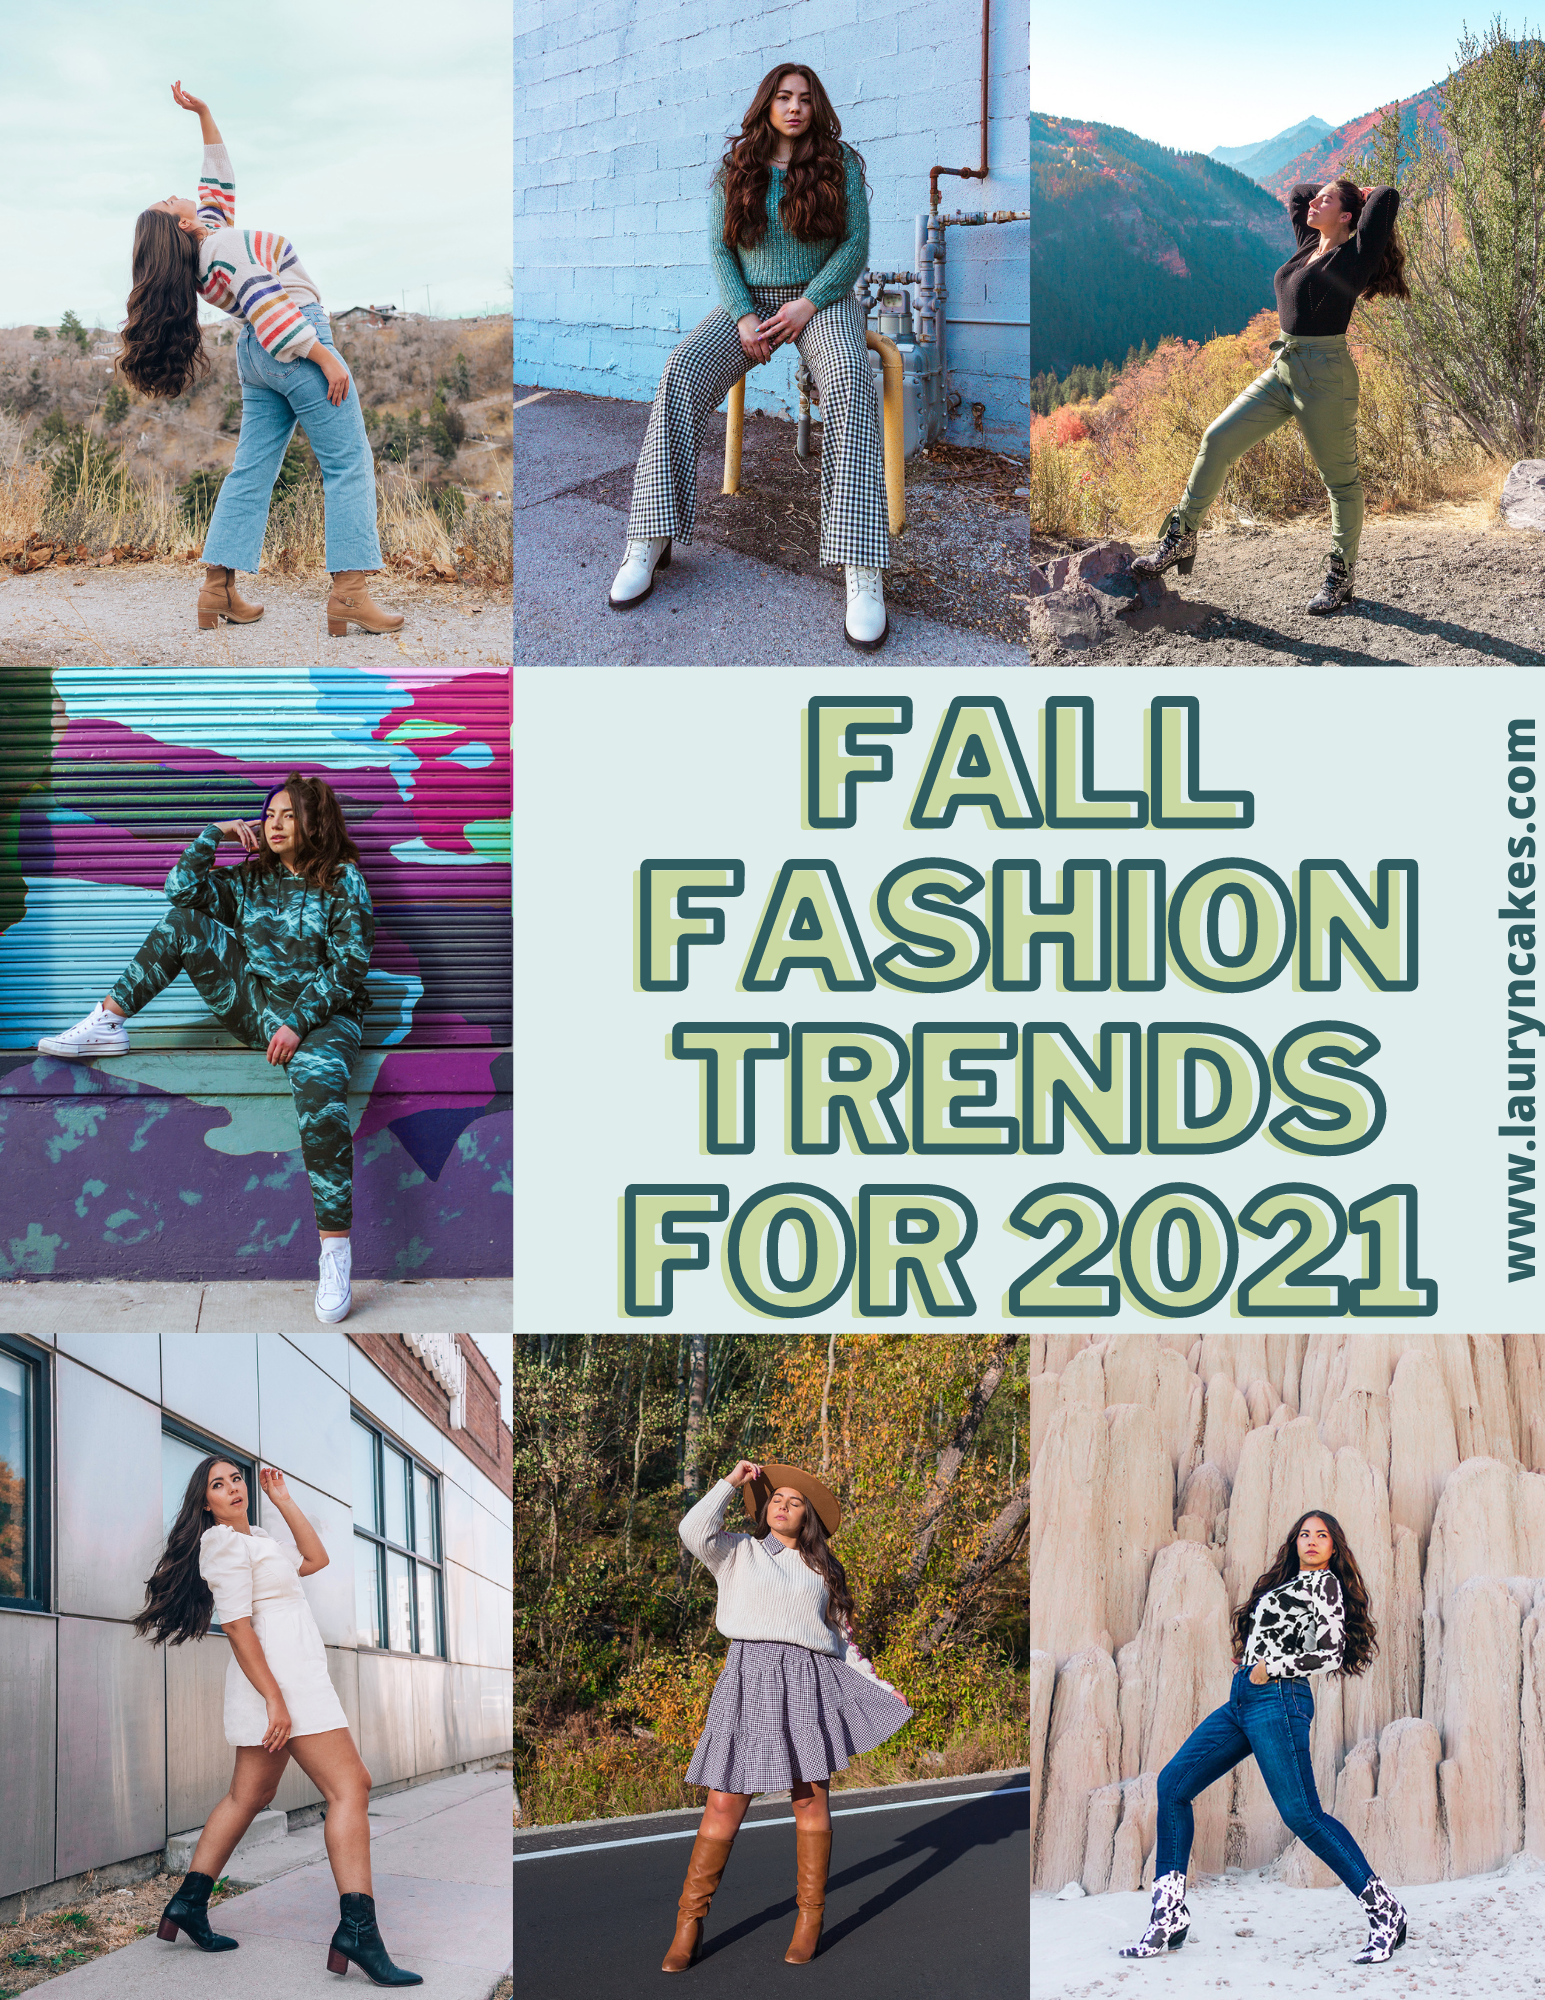 Collage of seven images of Lauryncakes in autumn outfits. Image says "fall fashion trends for 2021"